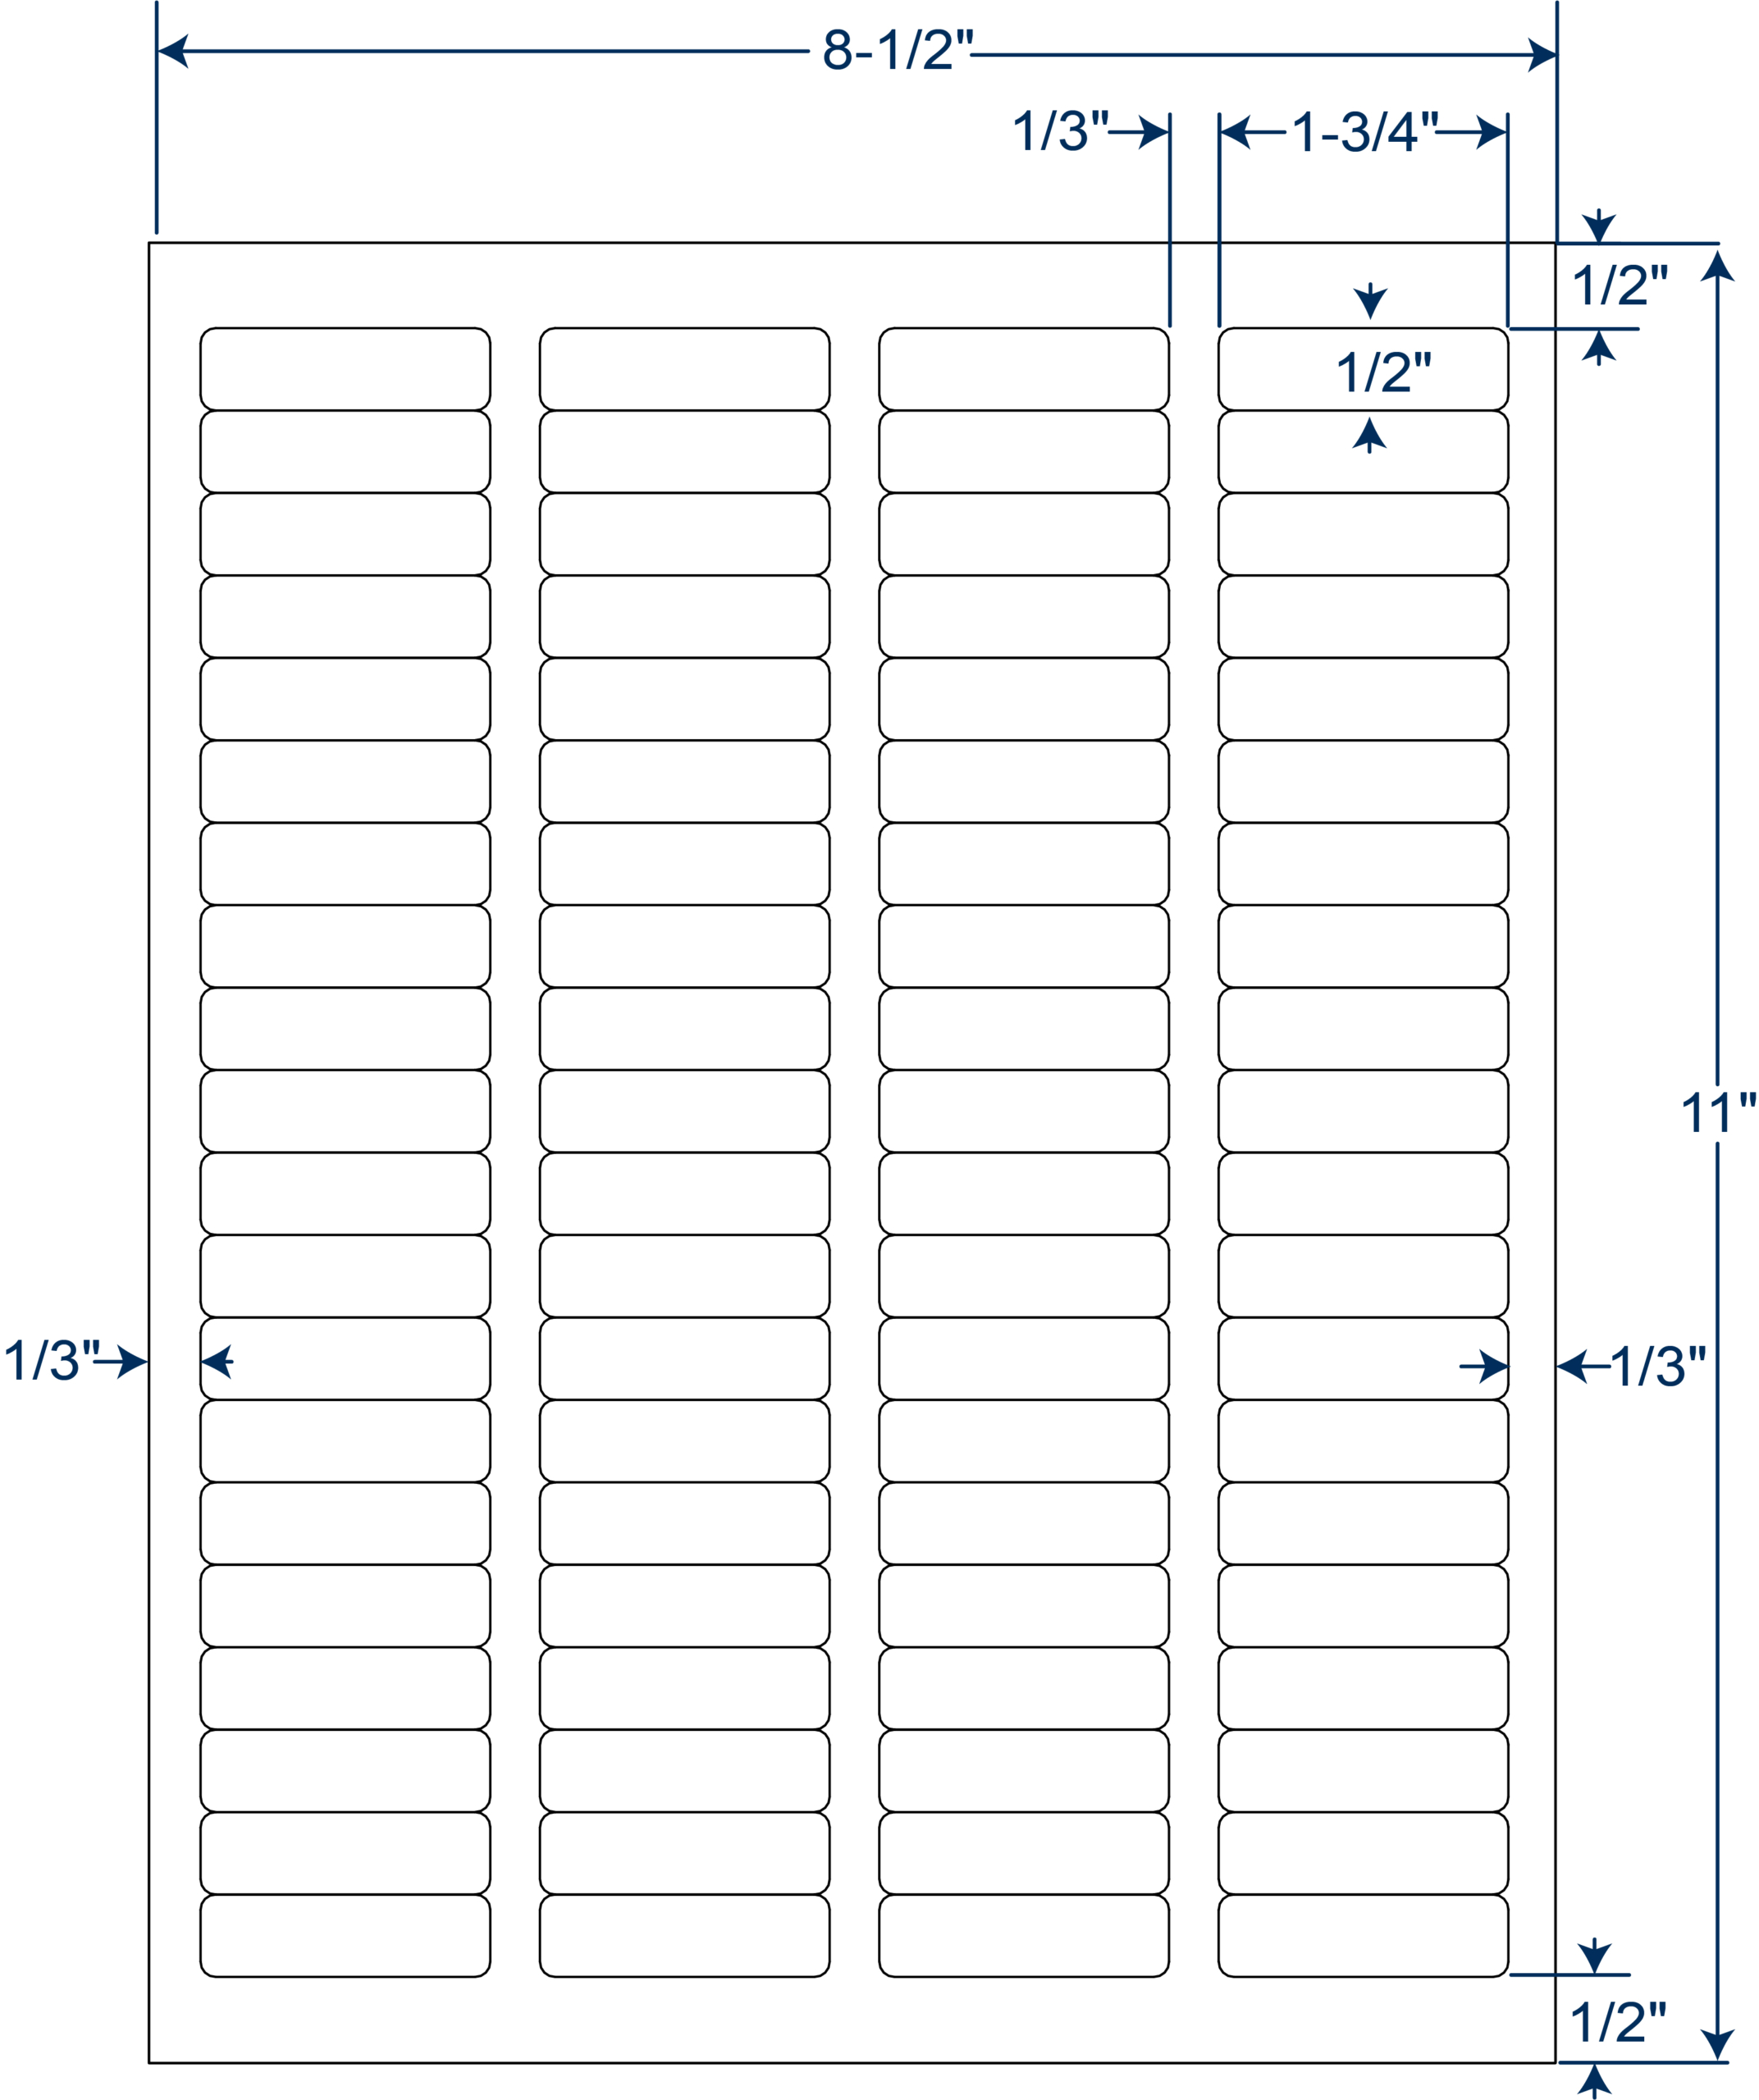 1-3/4" x 1/2" Permanent Sheeted Labels (250 Sheets)